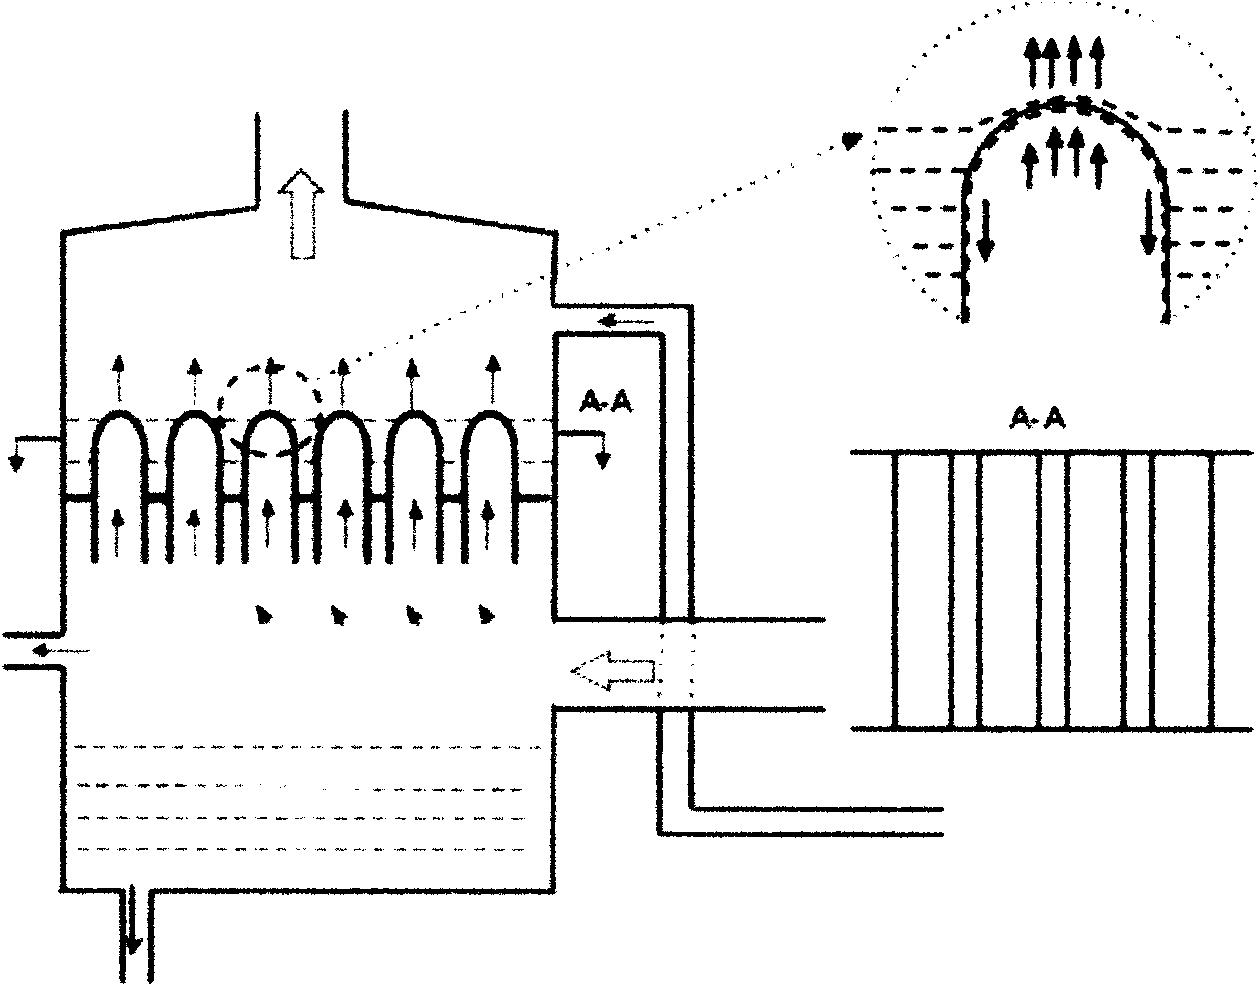 Low-pressure solar seawater desalination device using ejector